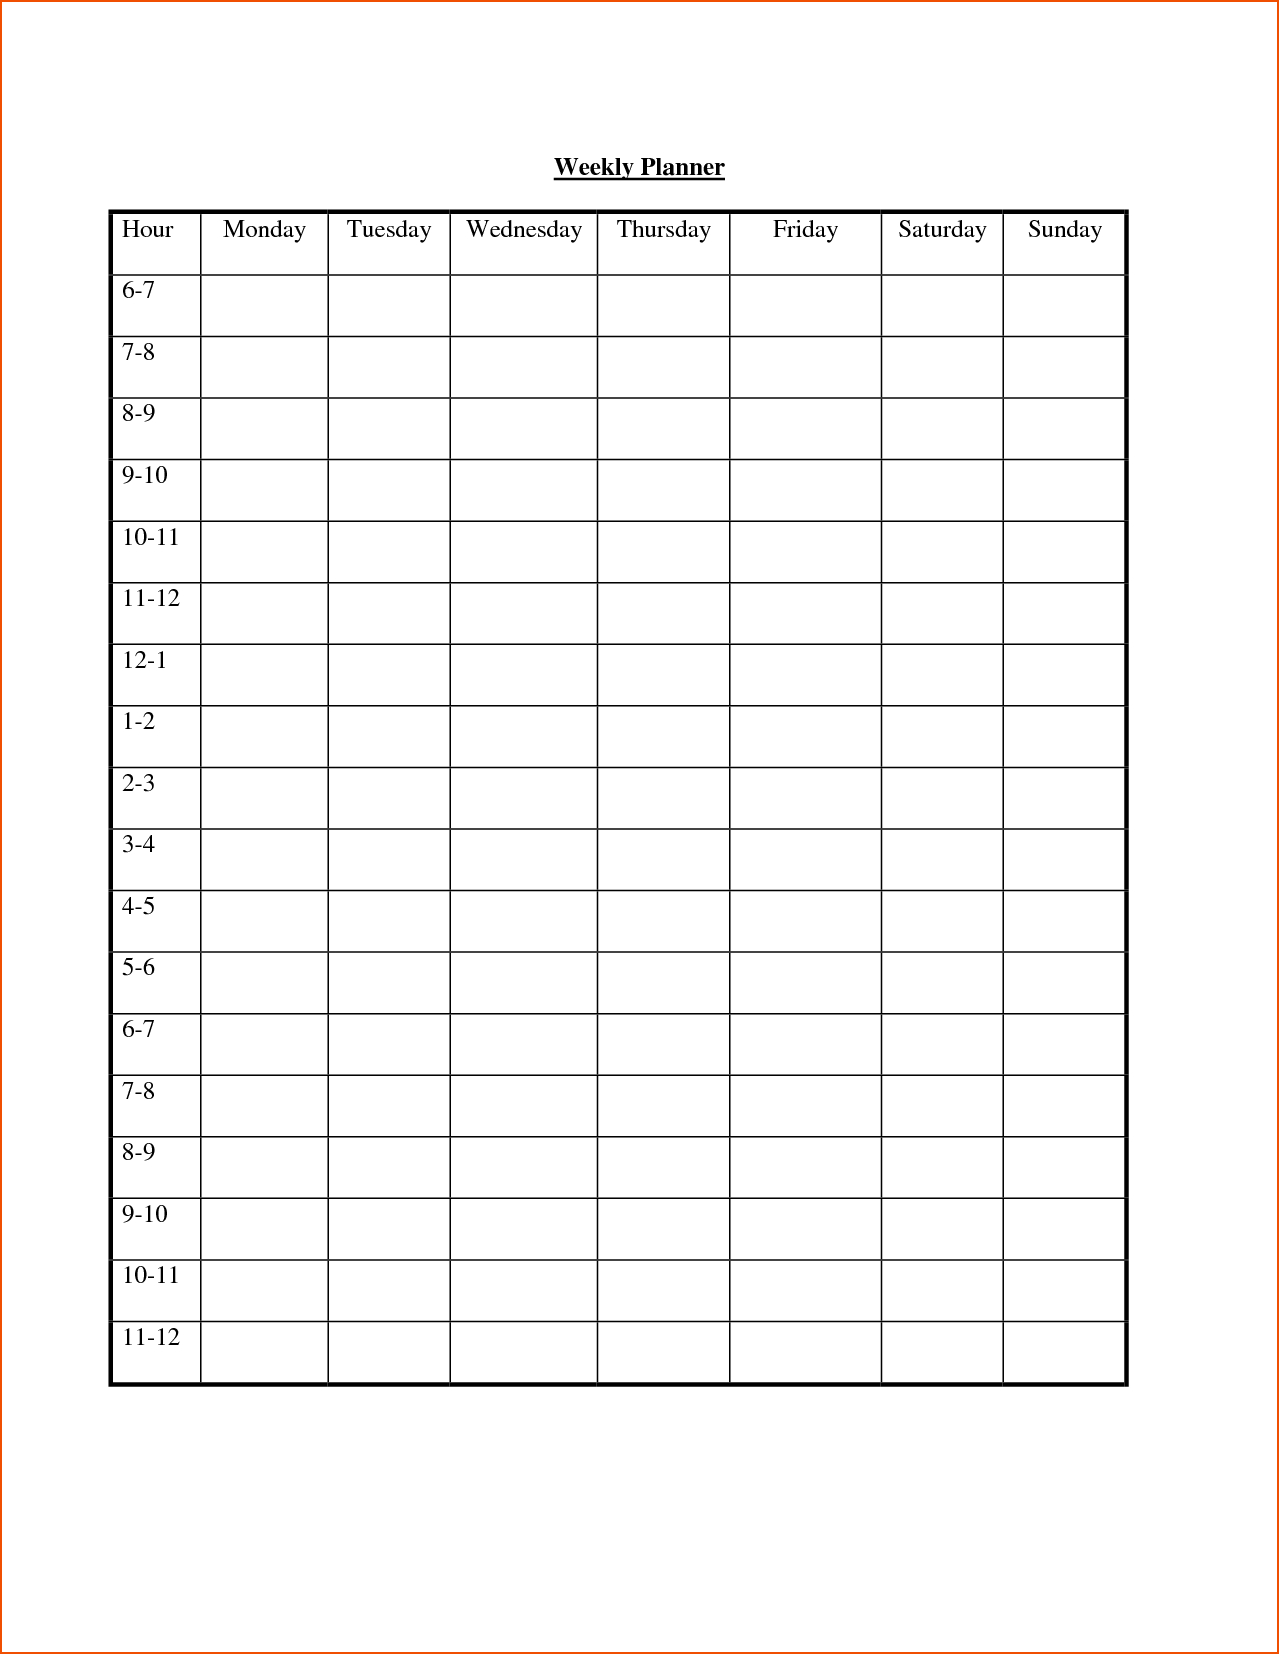 6+ Hourly Planner Template  Bookletemplate inside Printable Hourly Schedule